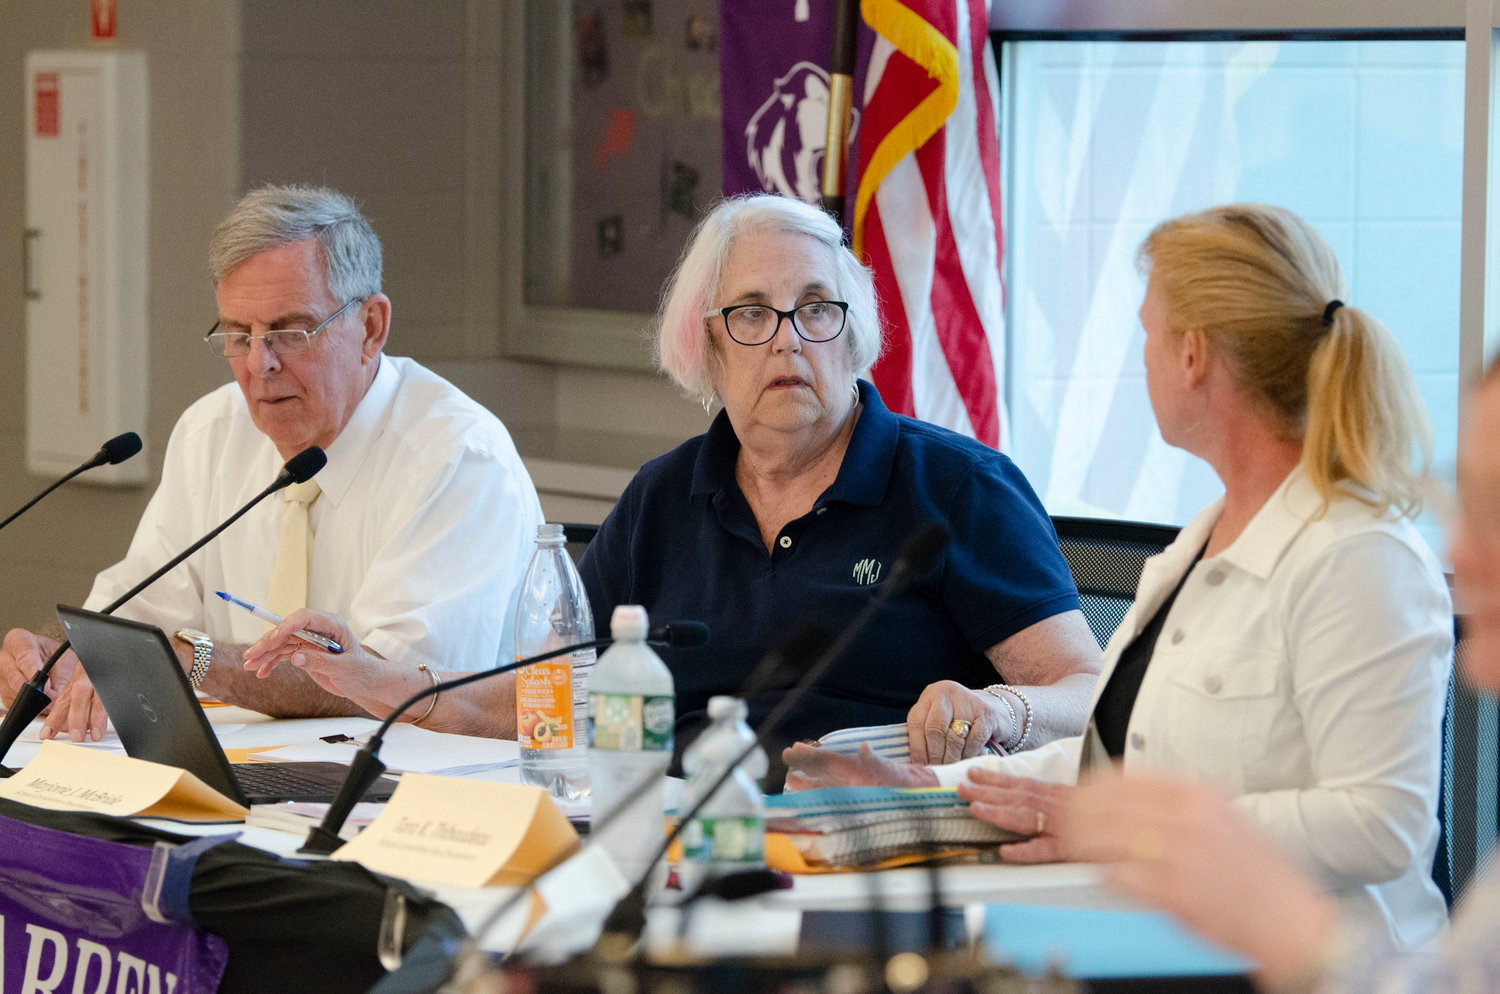 School committee members Victor Cabral, Marjorie McBride and Tara Thibaudeau discuss a point made by a resident during the open meeting.